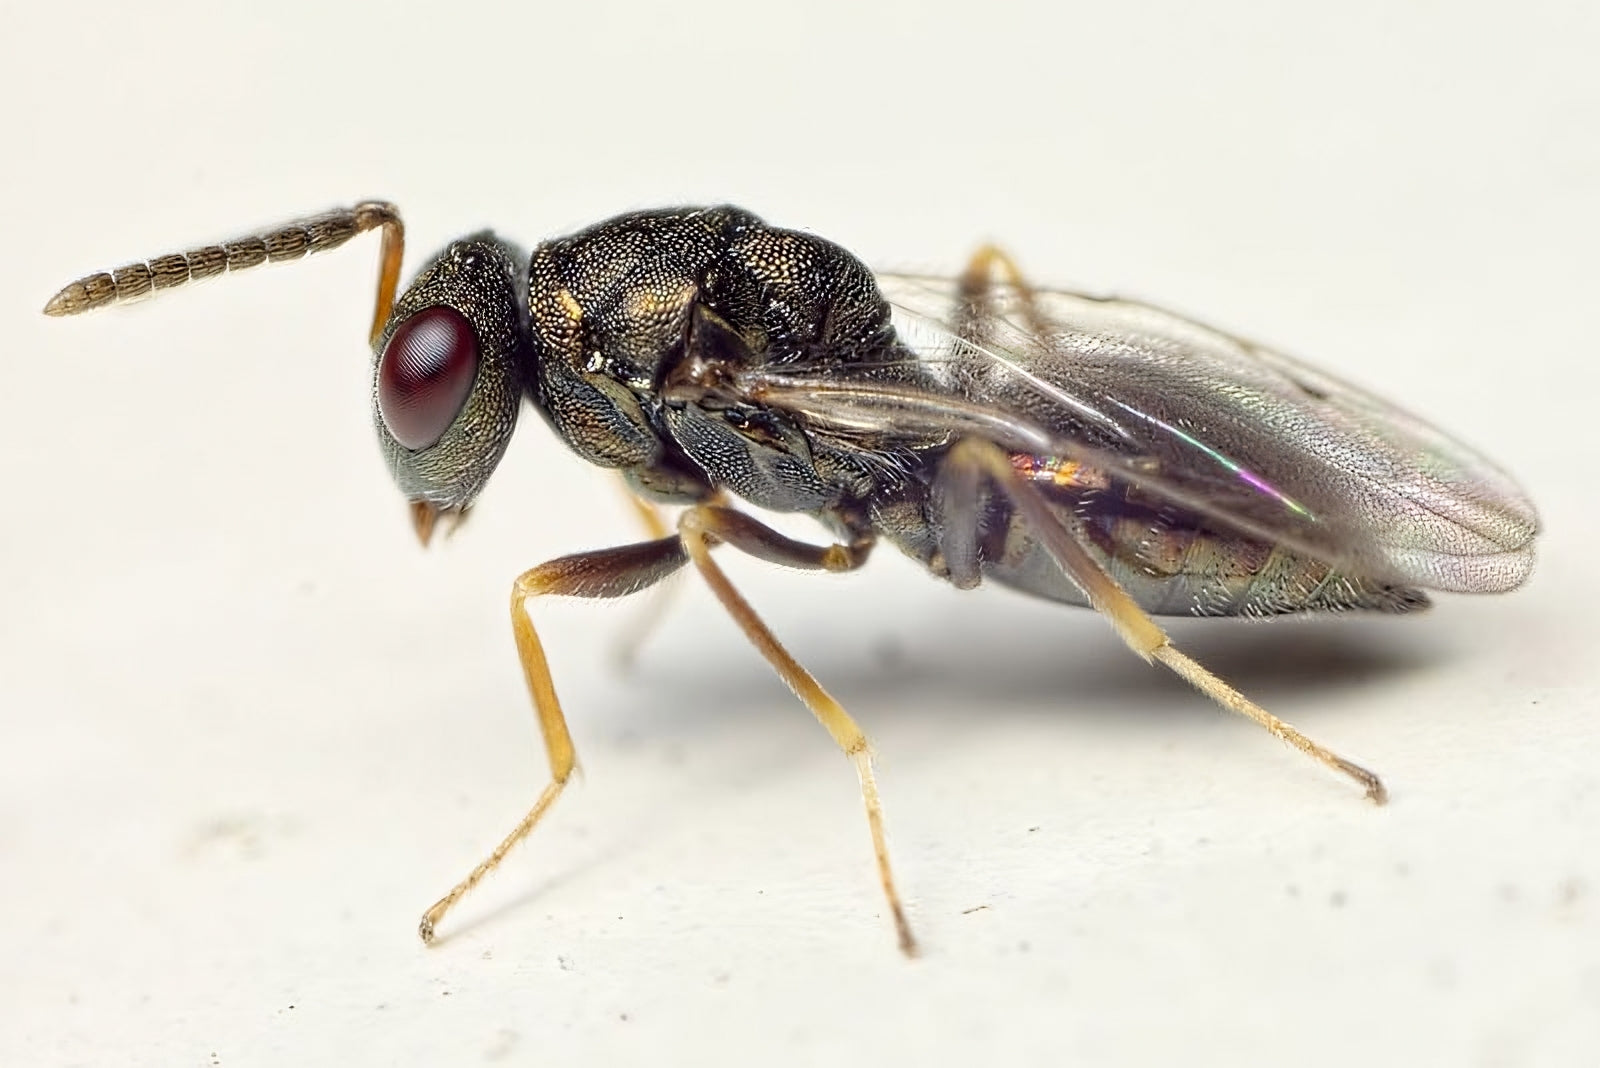 Pteromalus wasp